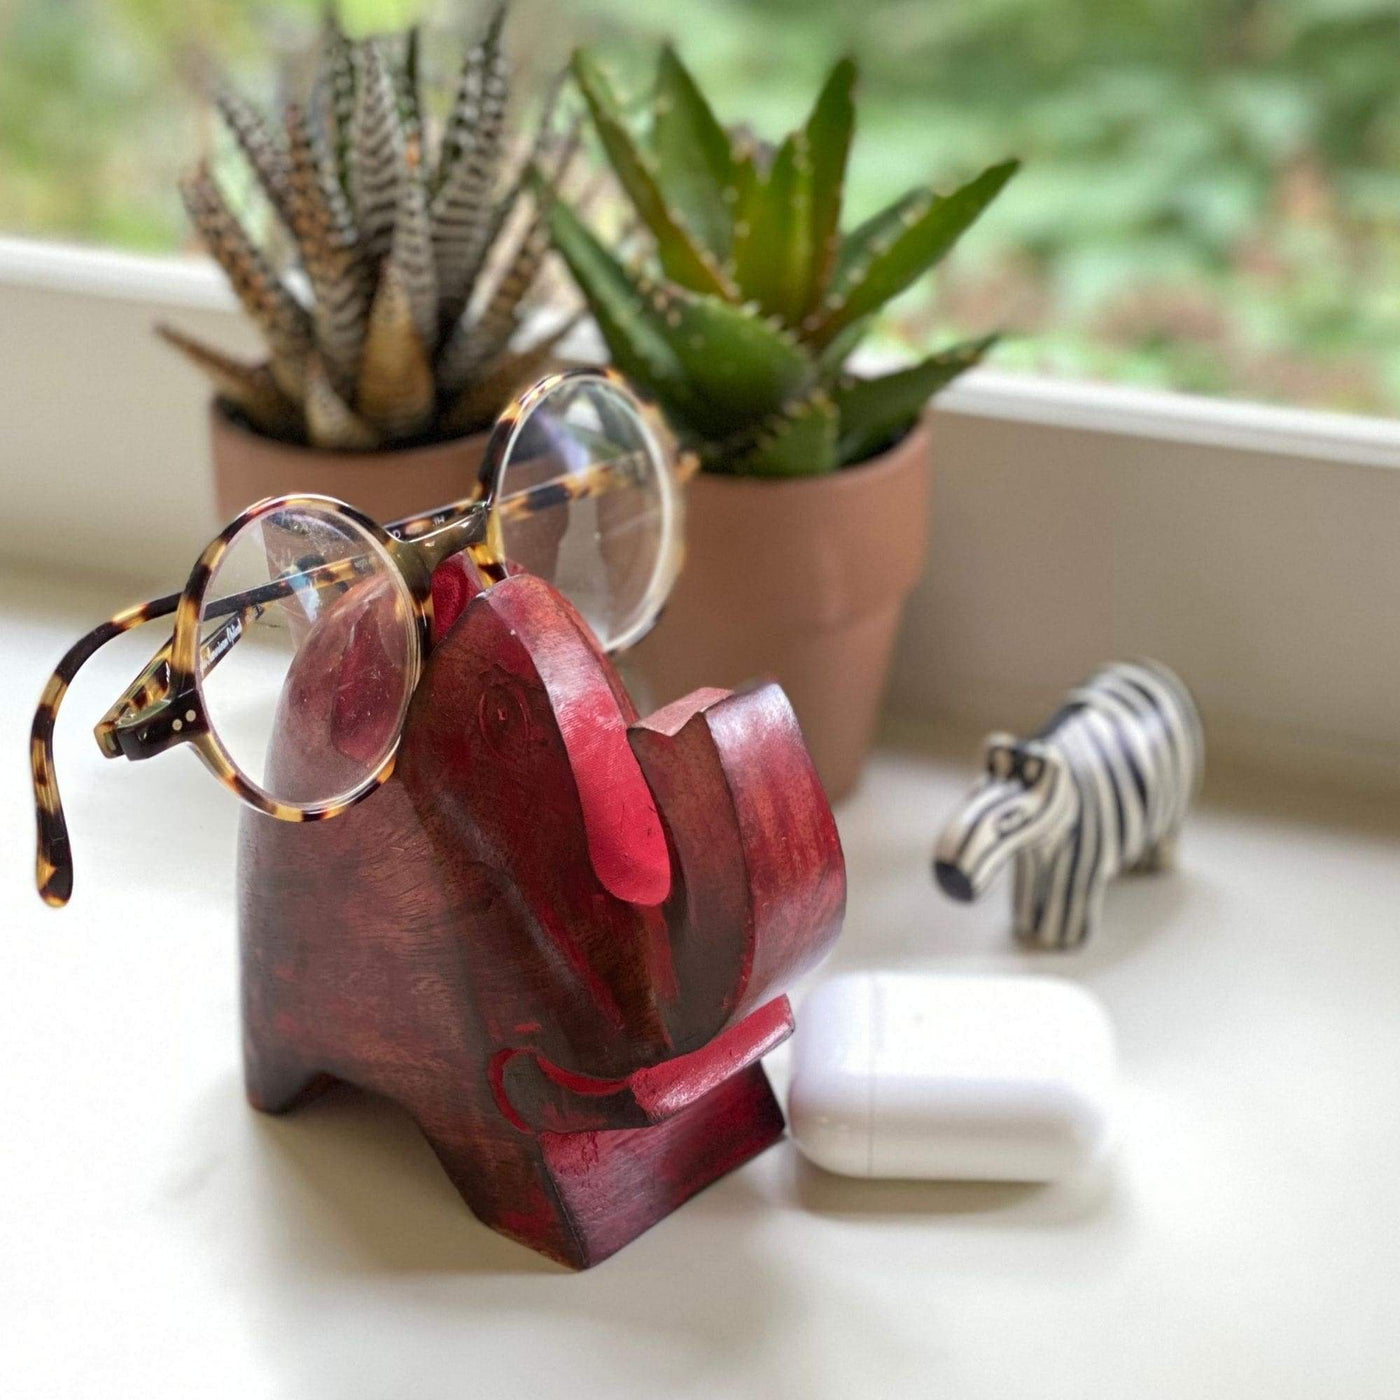 Elephant Eyeglass Stand in Red Wash - Yvonne’s 100th Wish Inc